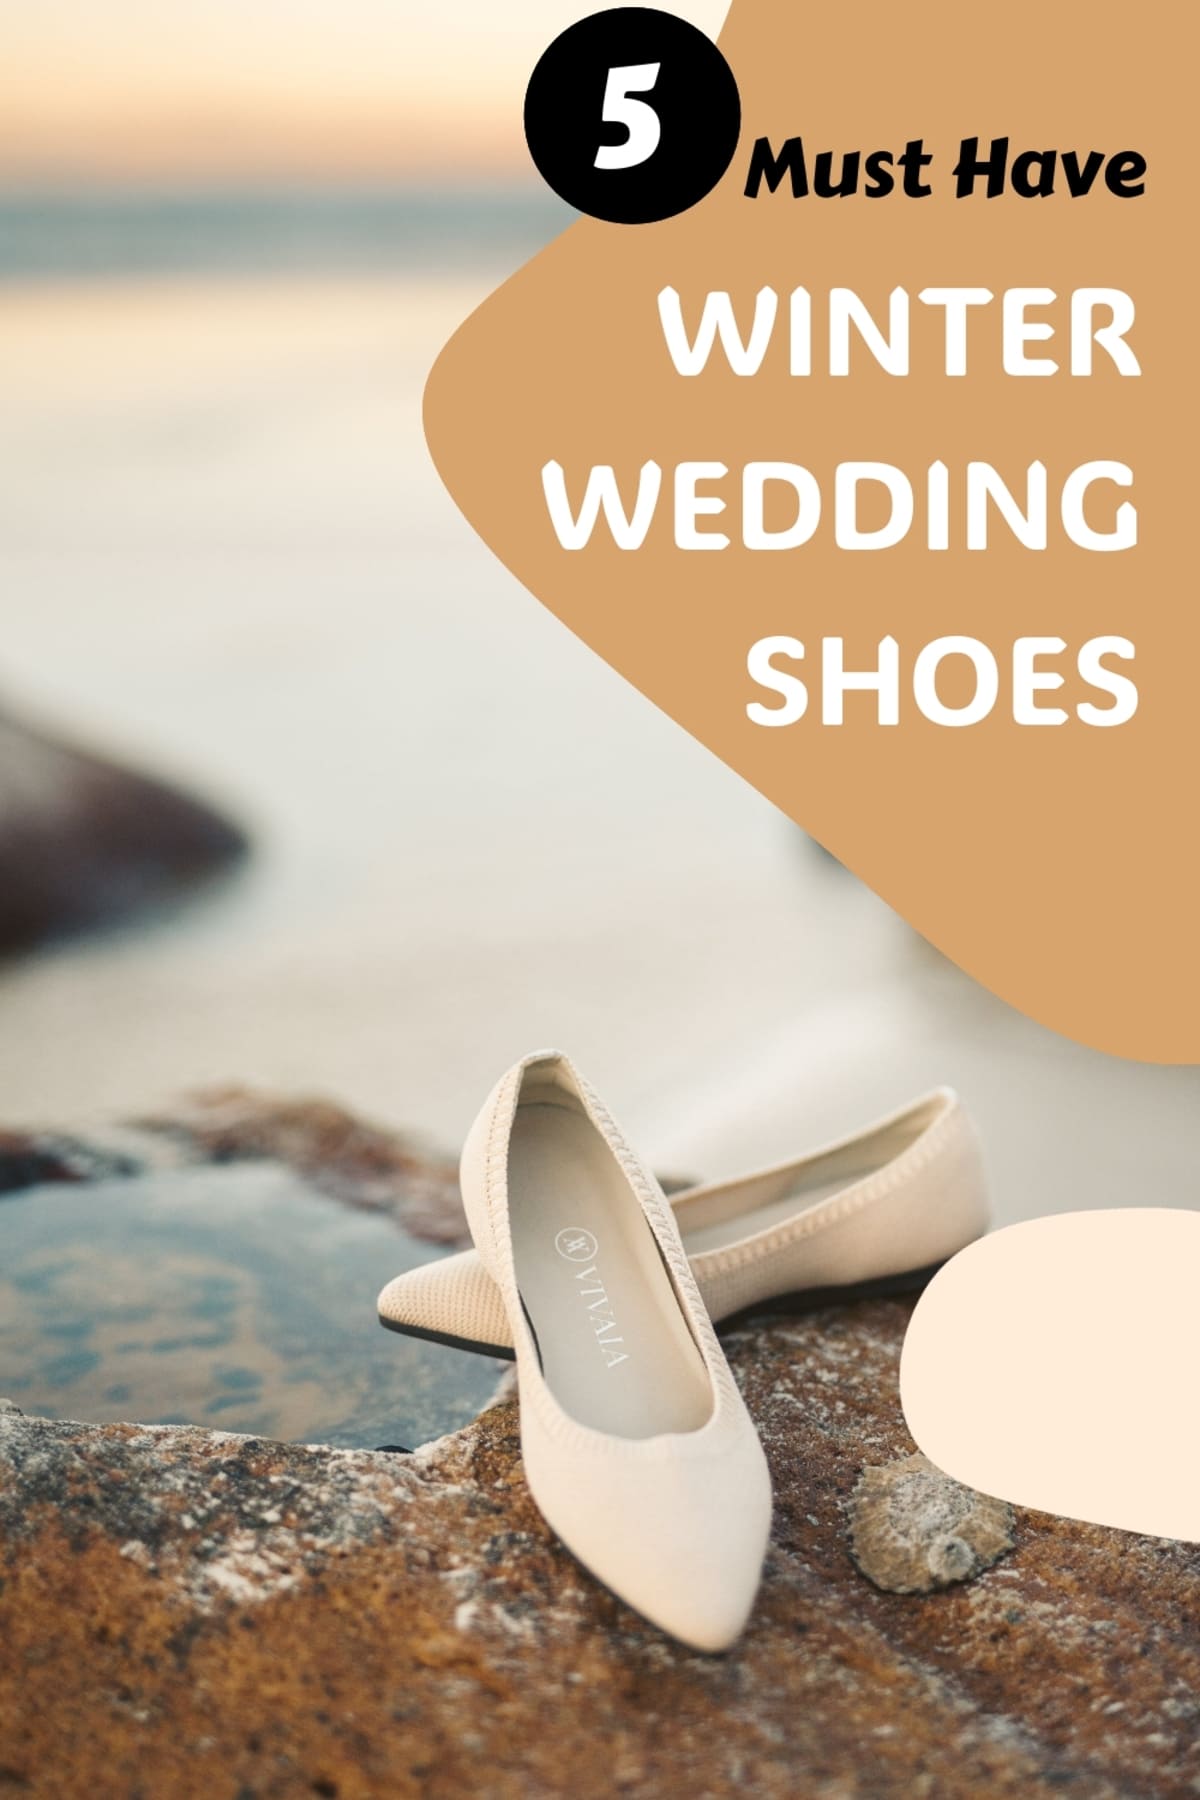 Winter Wedding Shoes That Are Both Stylish & Warm